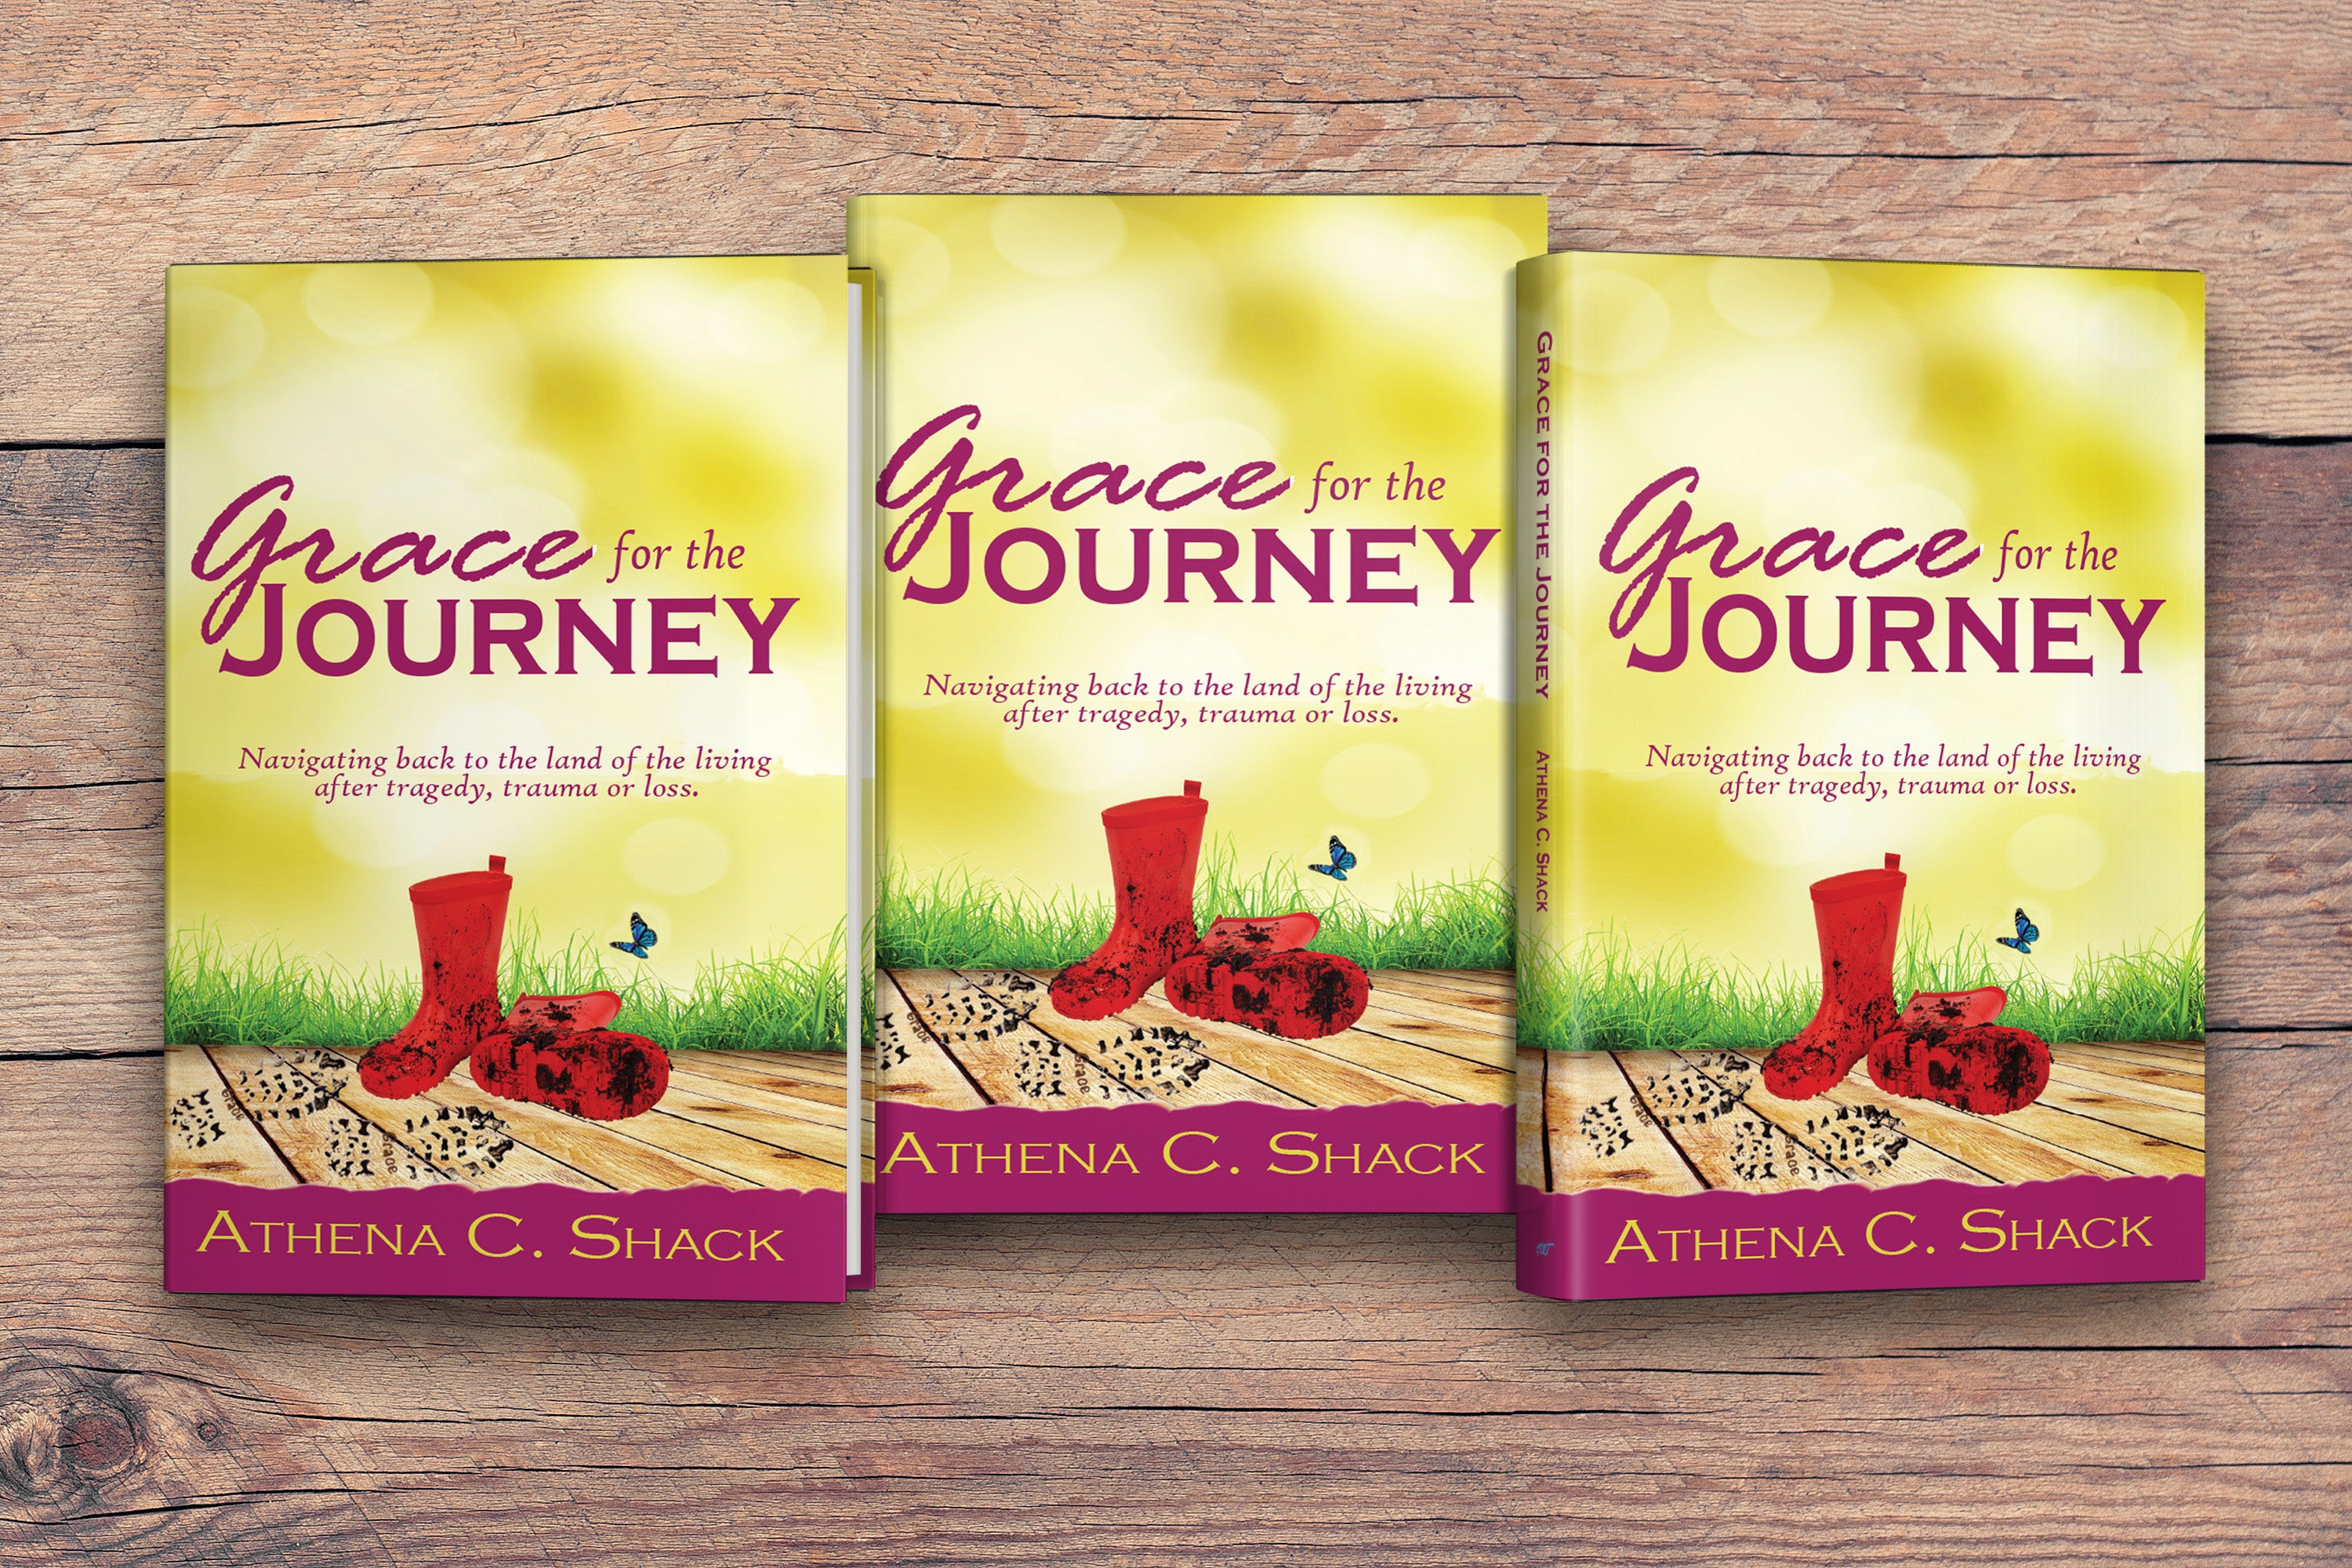 Grace for the Journey, by Athena C. Shack